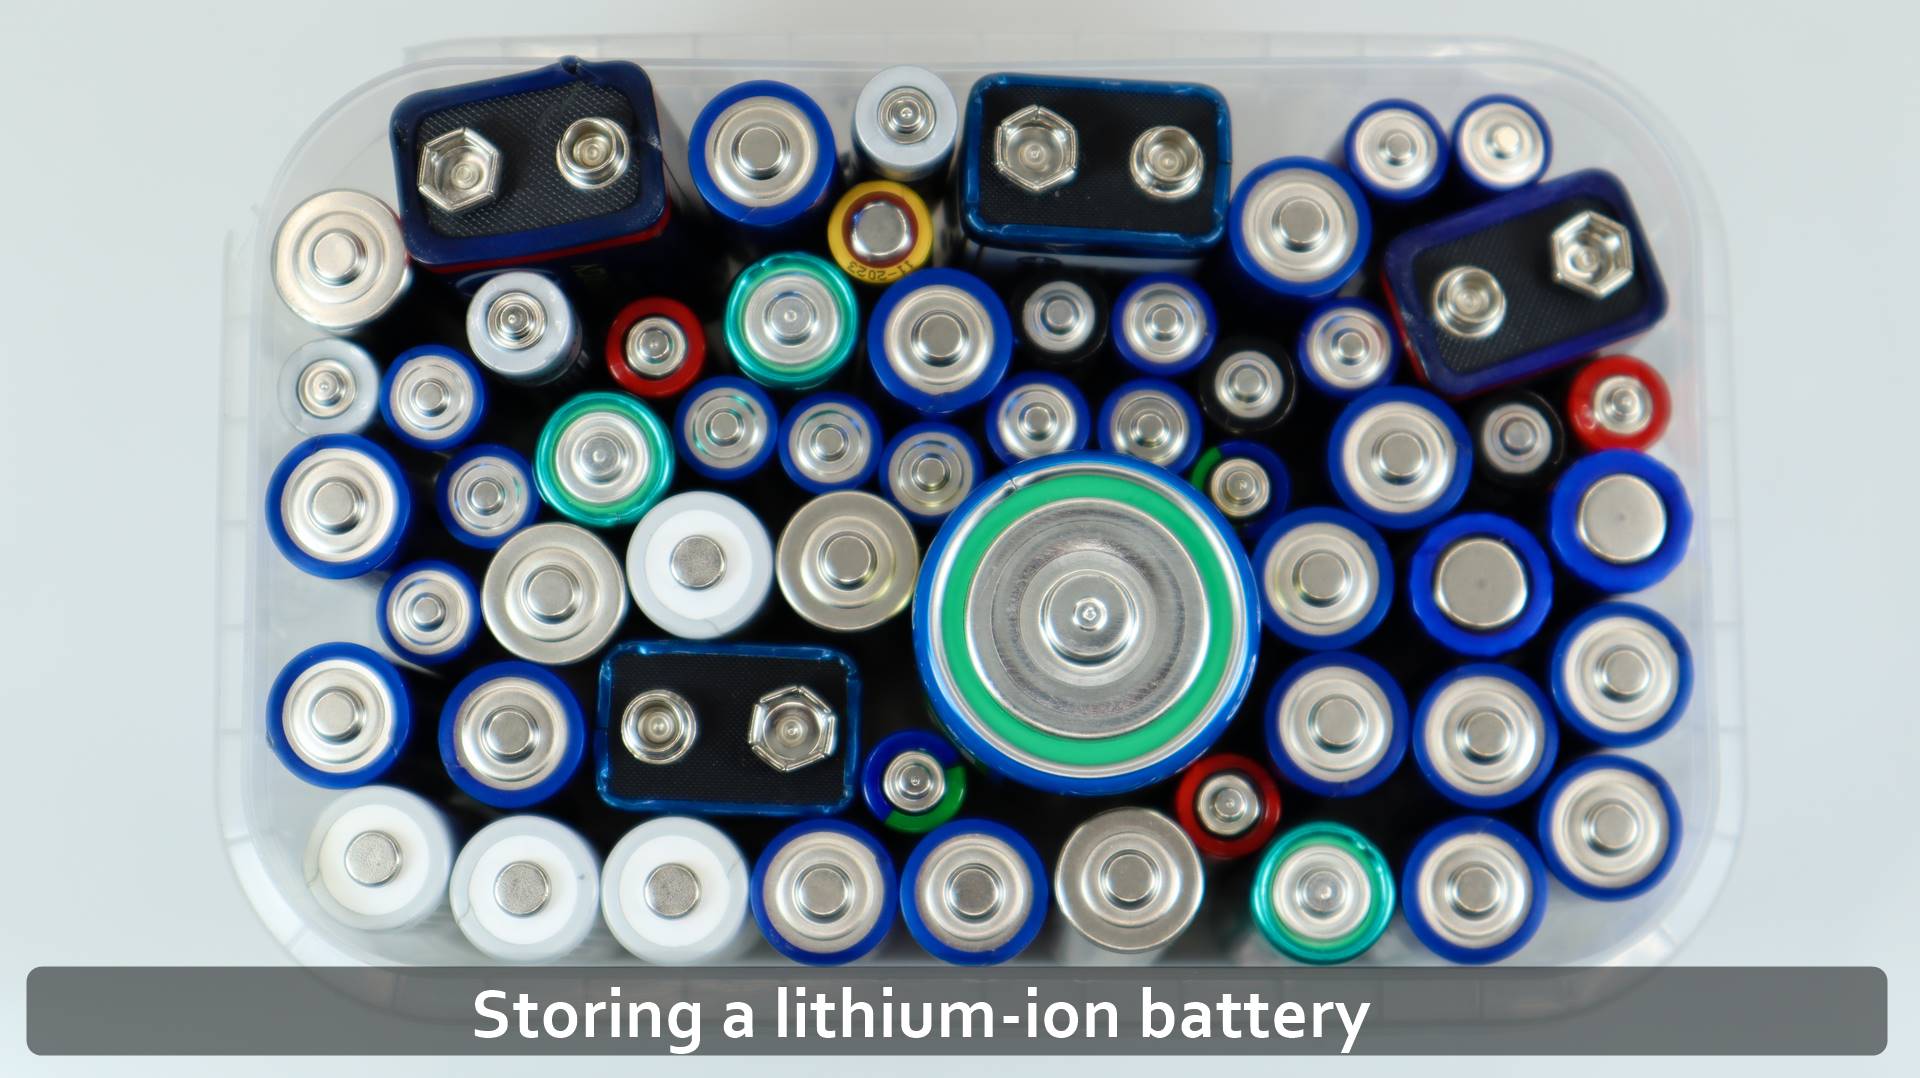 Storing a lithium ion battery